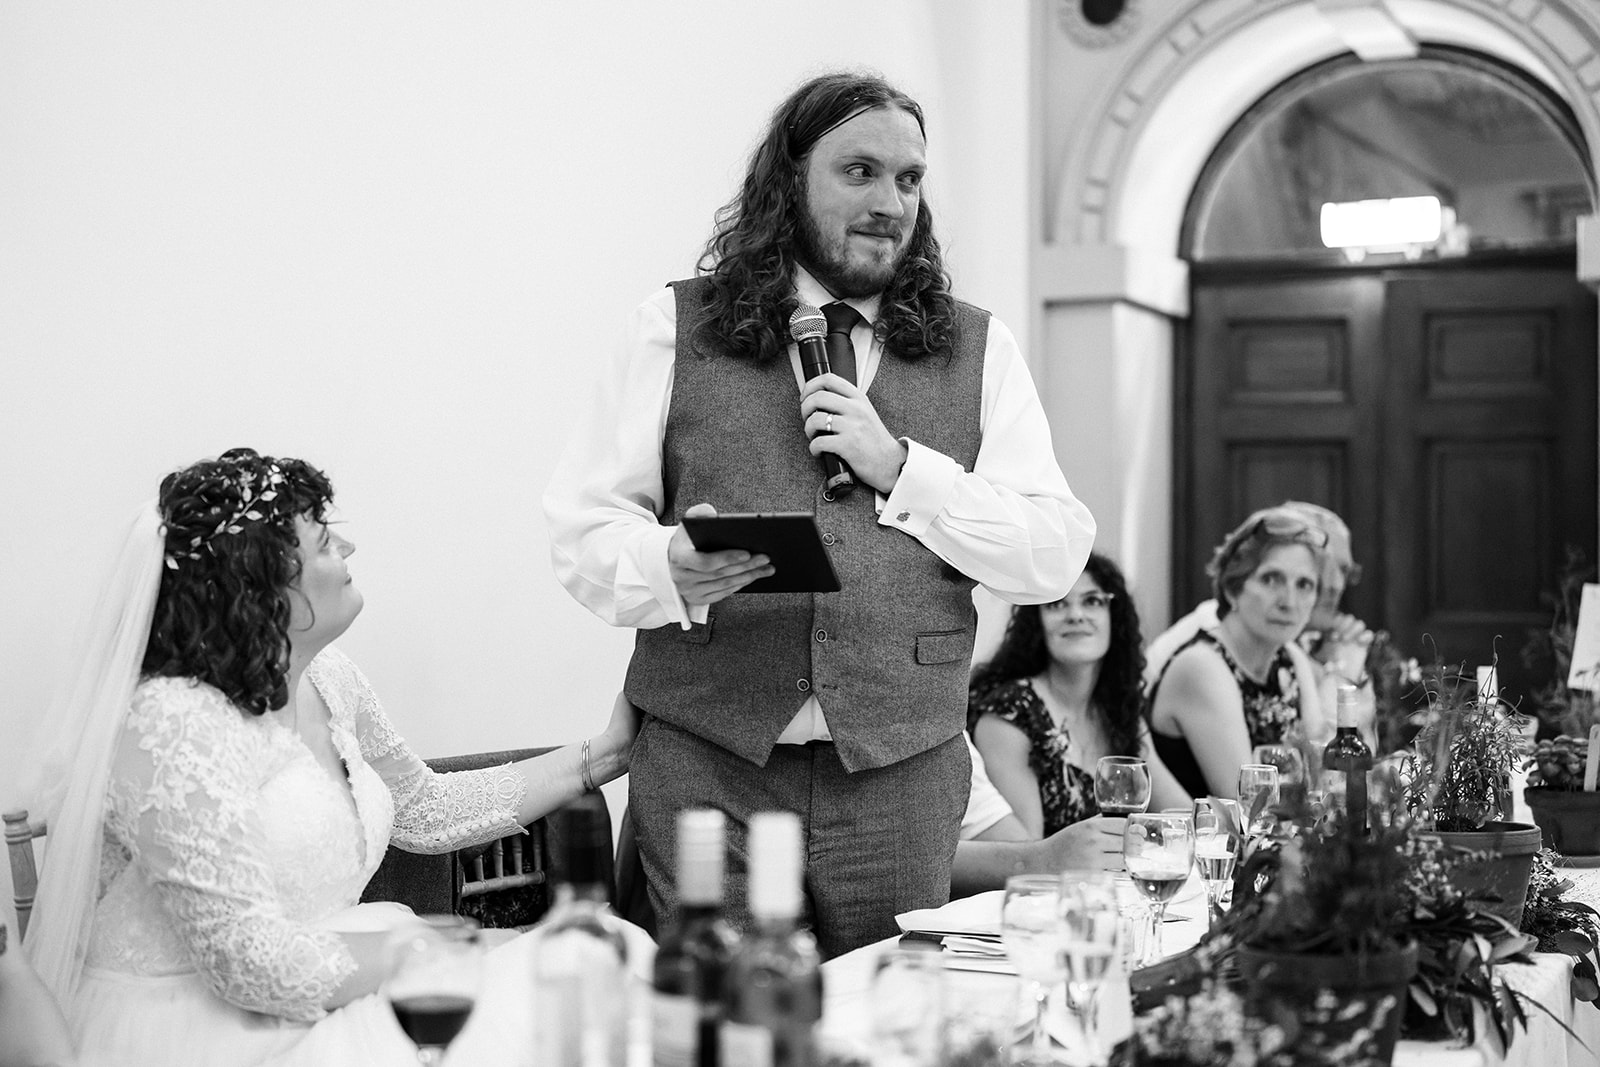 The groom getting emotional during his wedding speech at Wollaton Hall